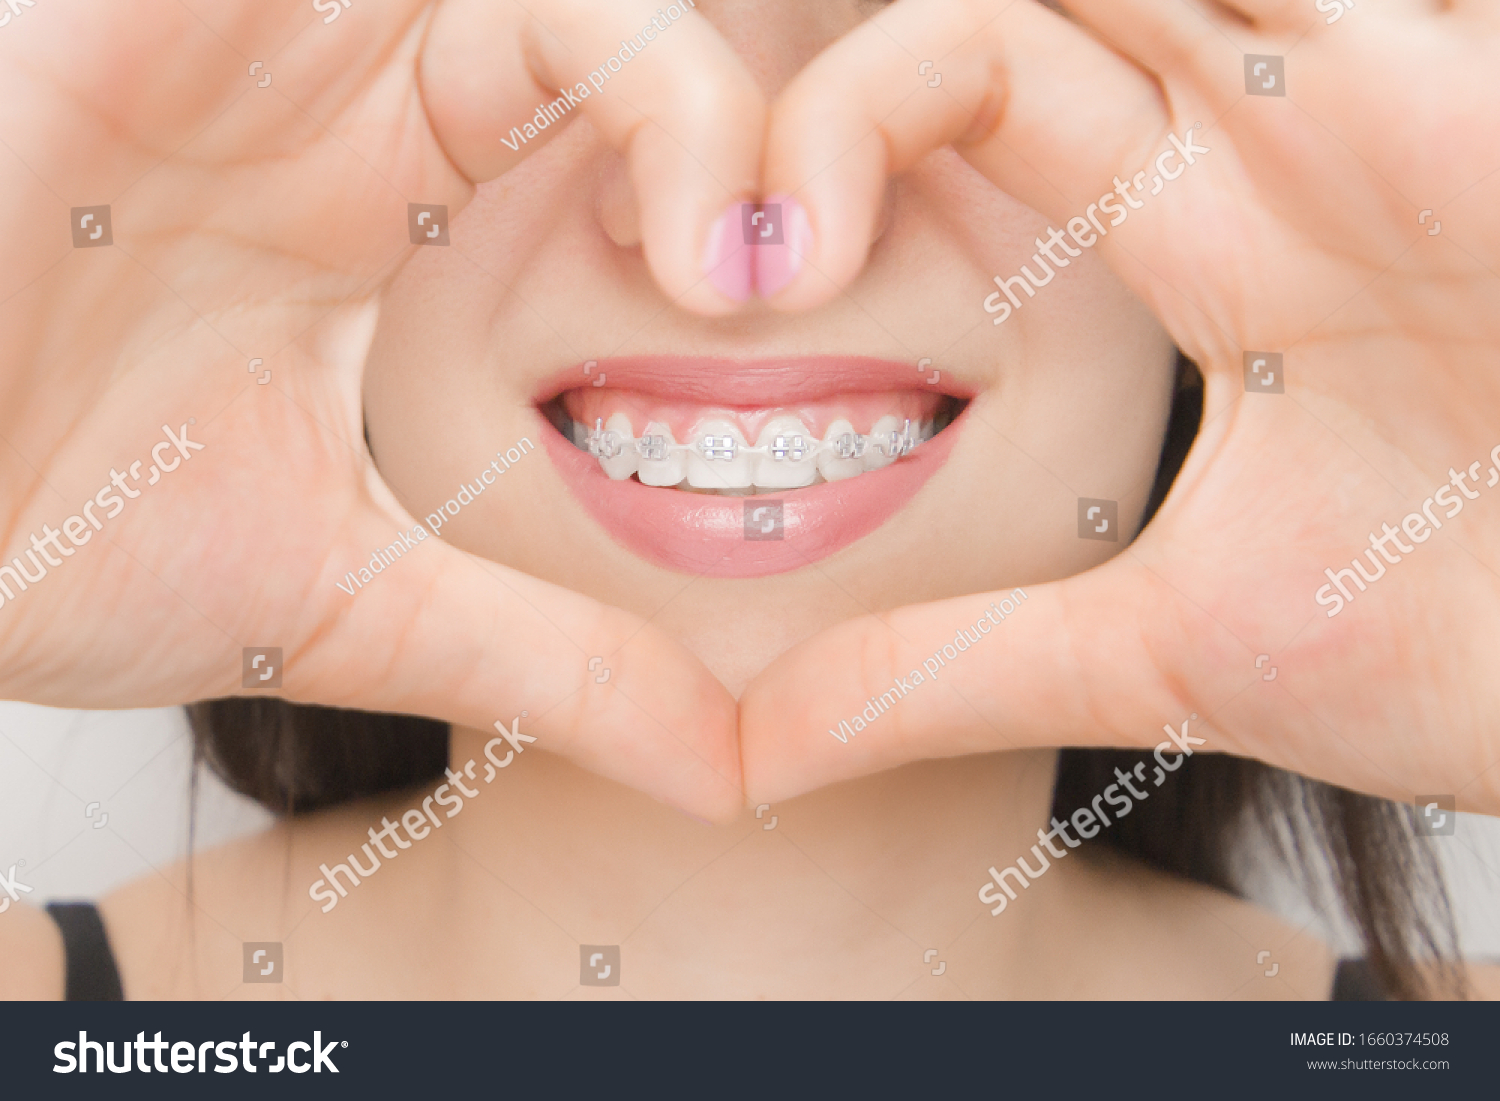 Dental braces in happy womans mouths through the heart. Brackets on the teeth after whitening. Self-ligating brackets with metal ties and gray elastics or rubber bands for perfect smile. Orthodontic #1660374508